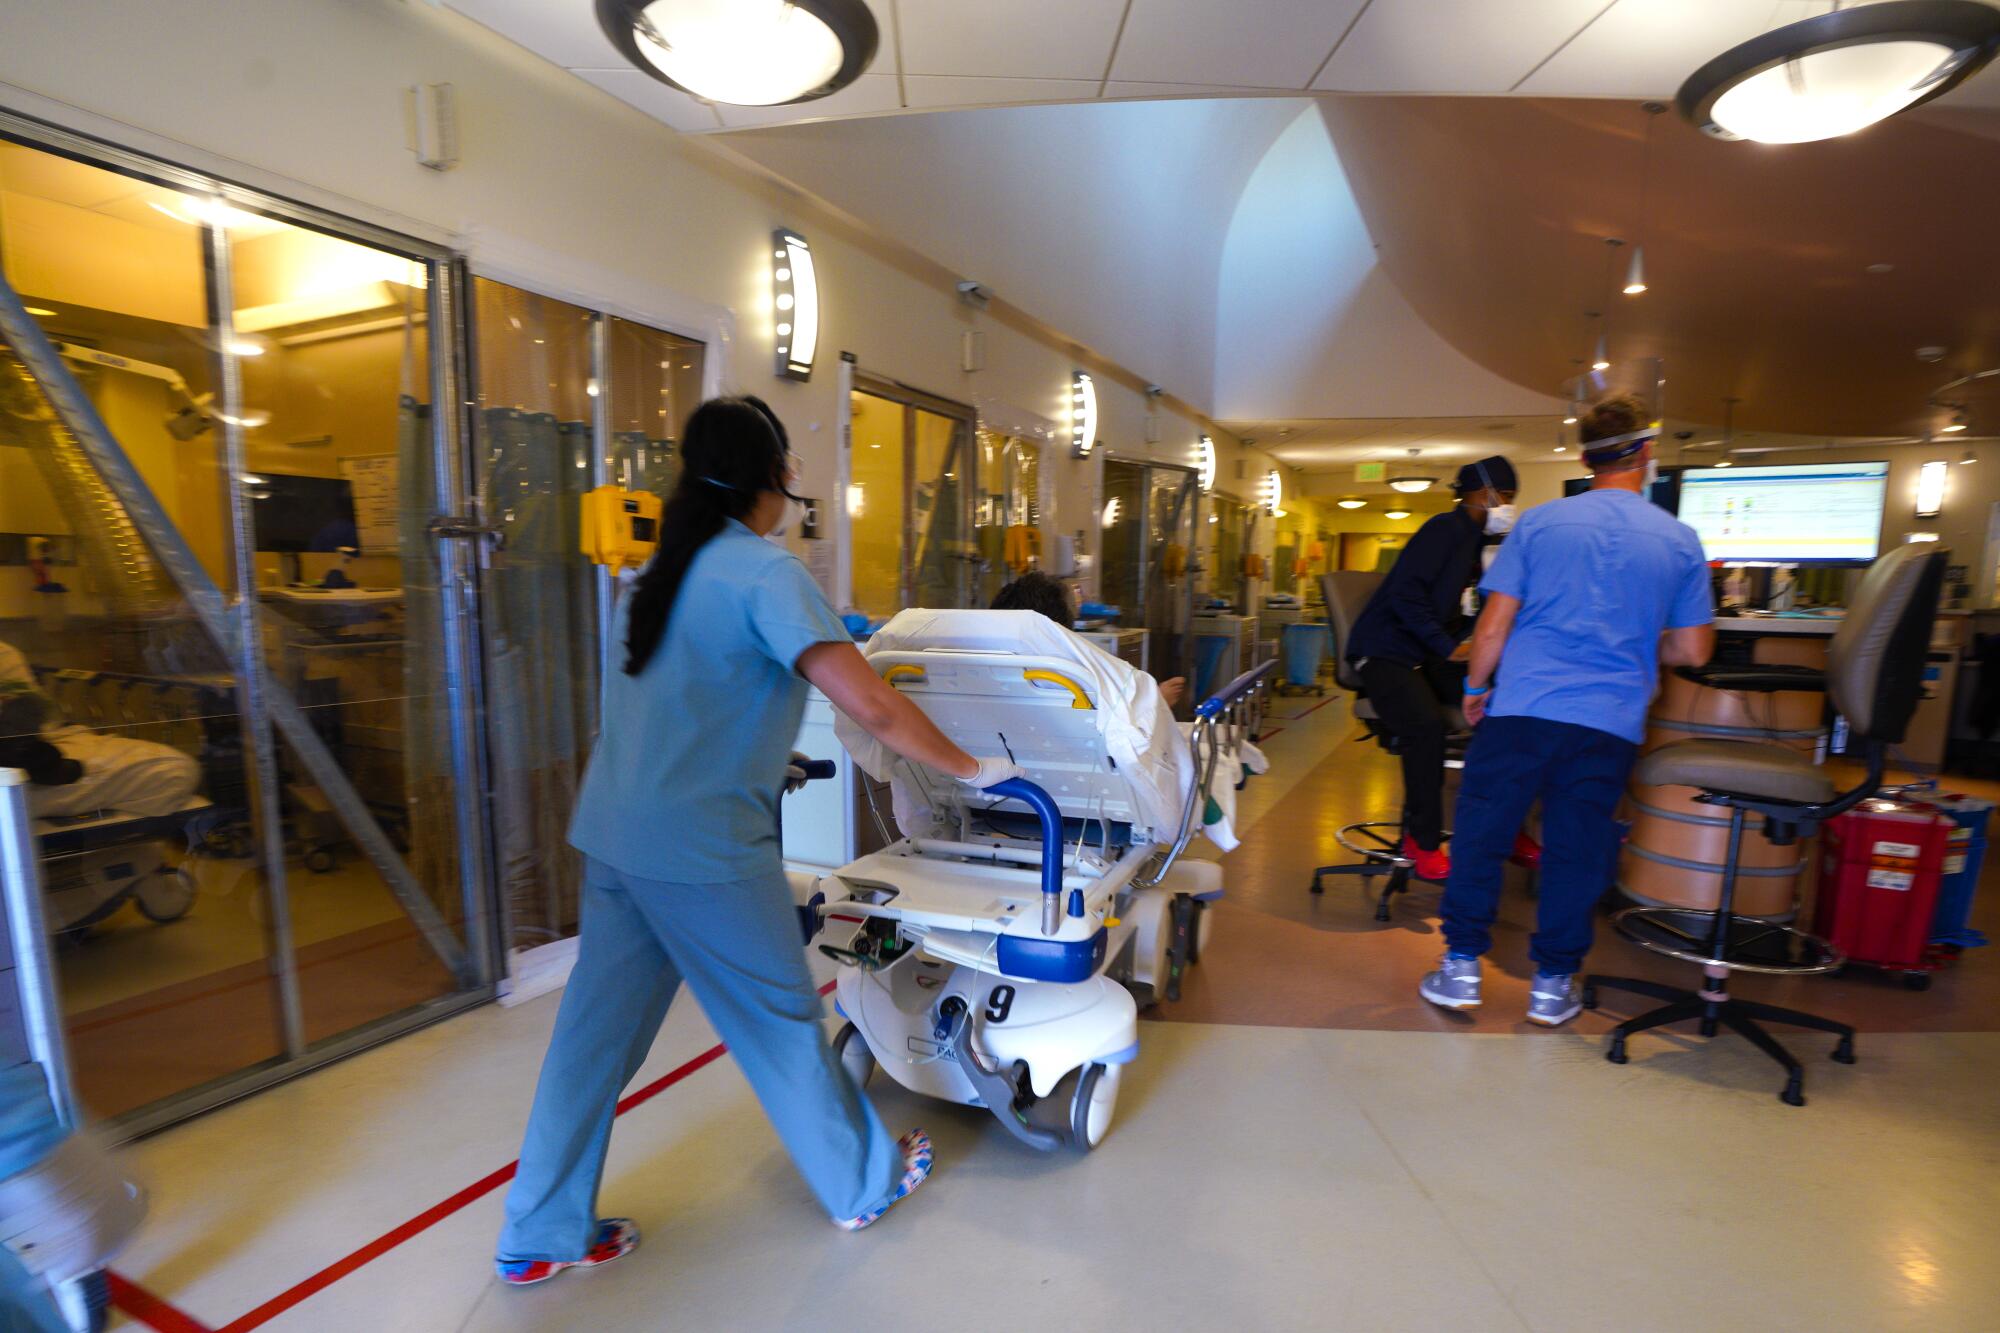 A patient is taken from the ambulance to an ER exam room at Sharp Grossmont Hospital.